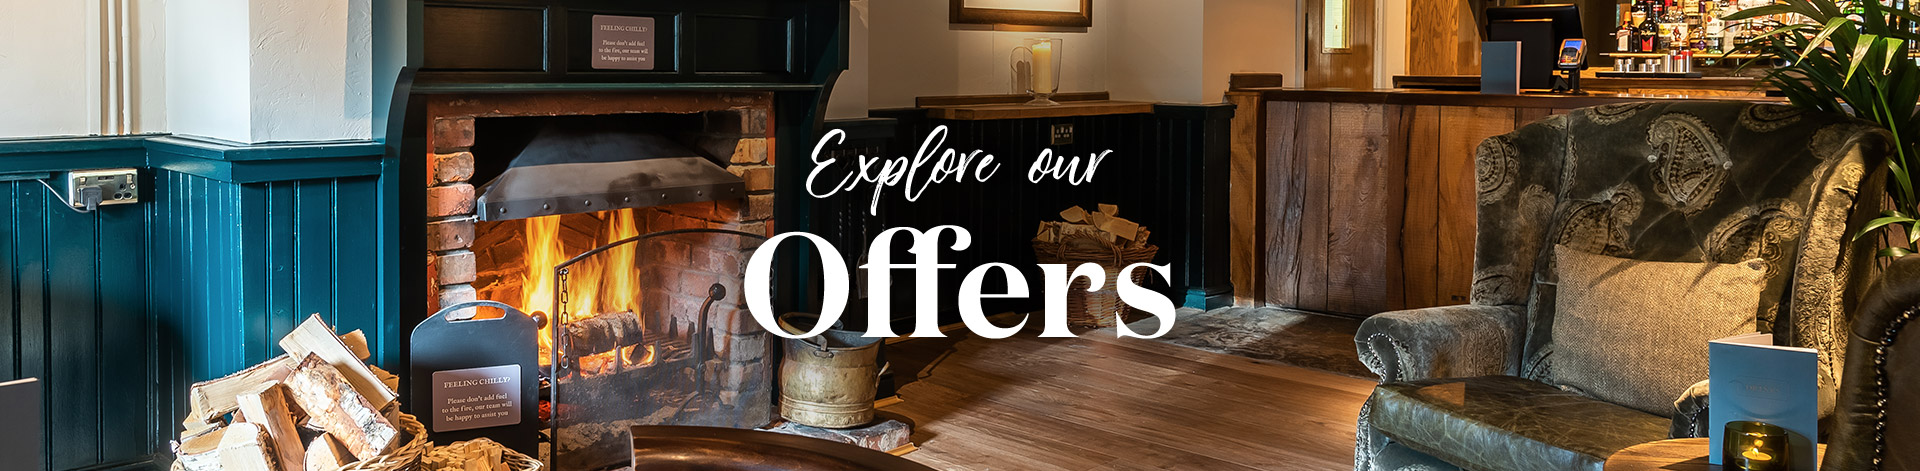 Our latest offers at The Melville Inn